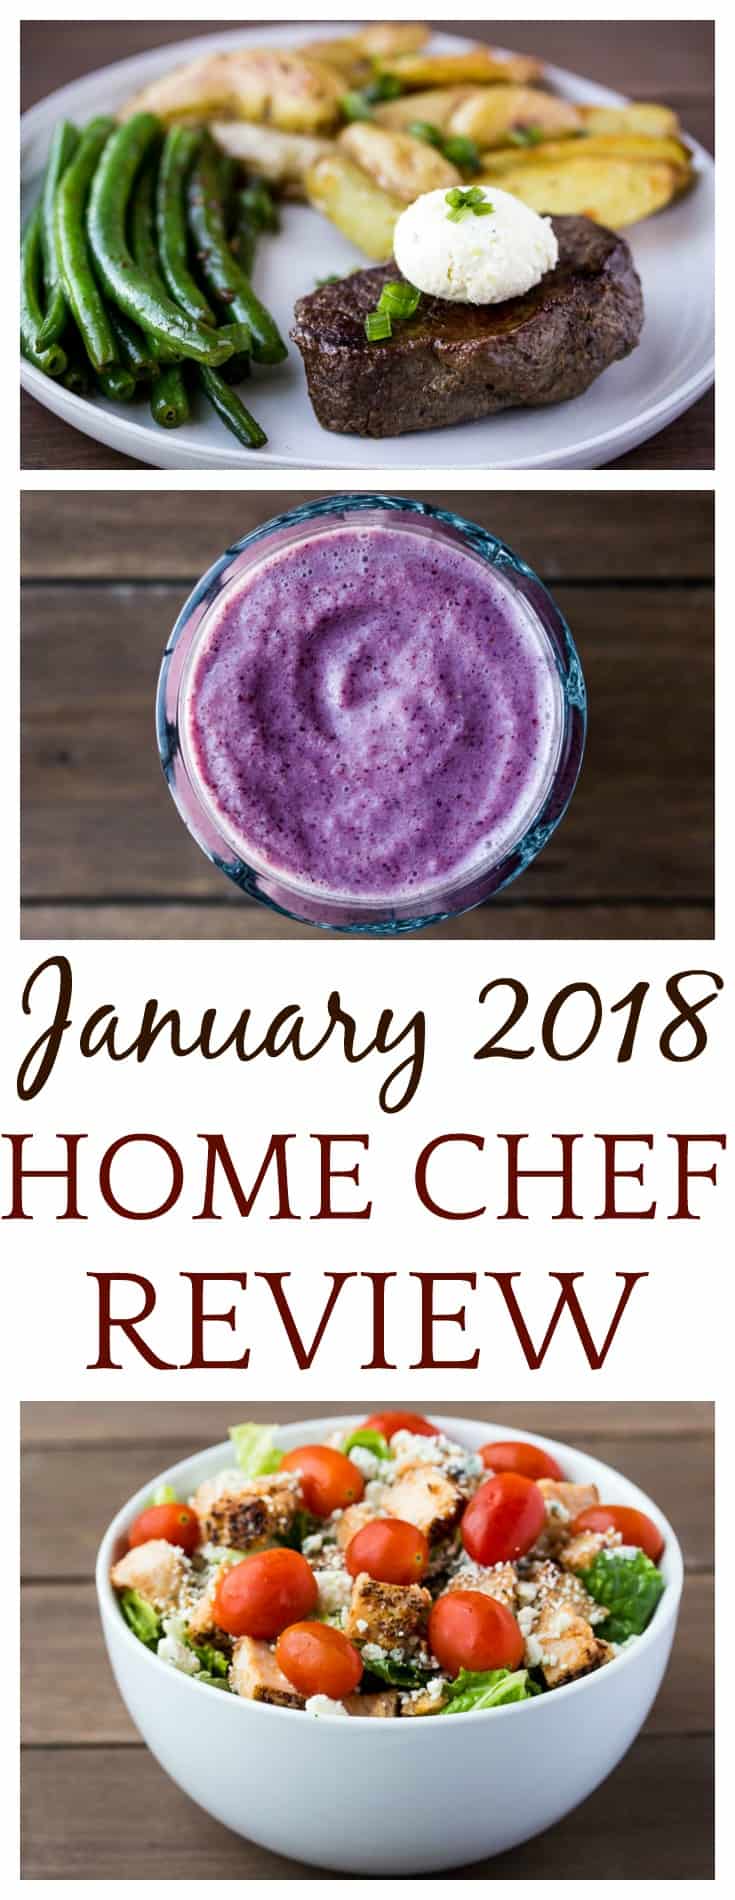 I've really been loving Home Chef! This is my third January 2018 Home Chef Subscription Box Review. It includes a salad, smoothie, and complete meal! | #homechef #homechefmeals #homechefreview #mealkits #subscriptionbox